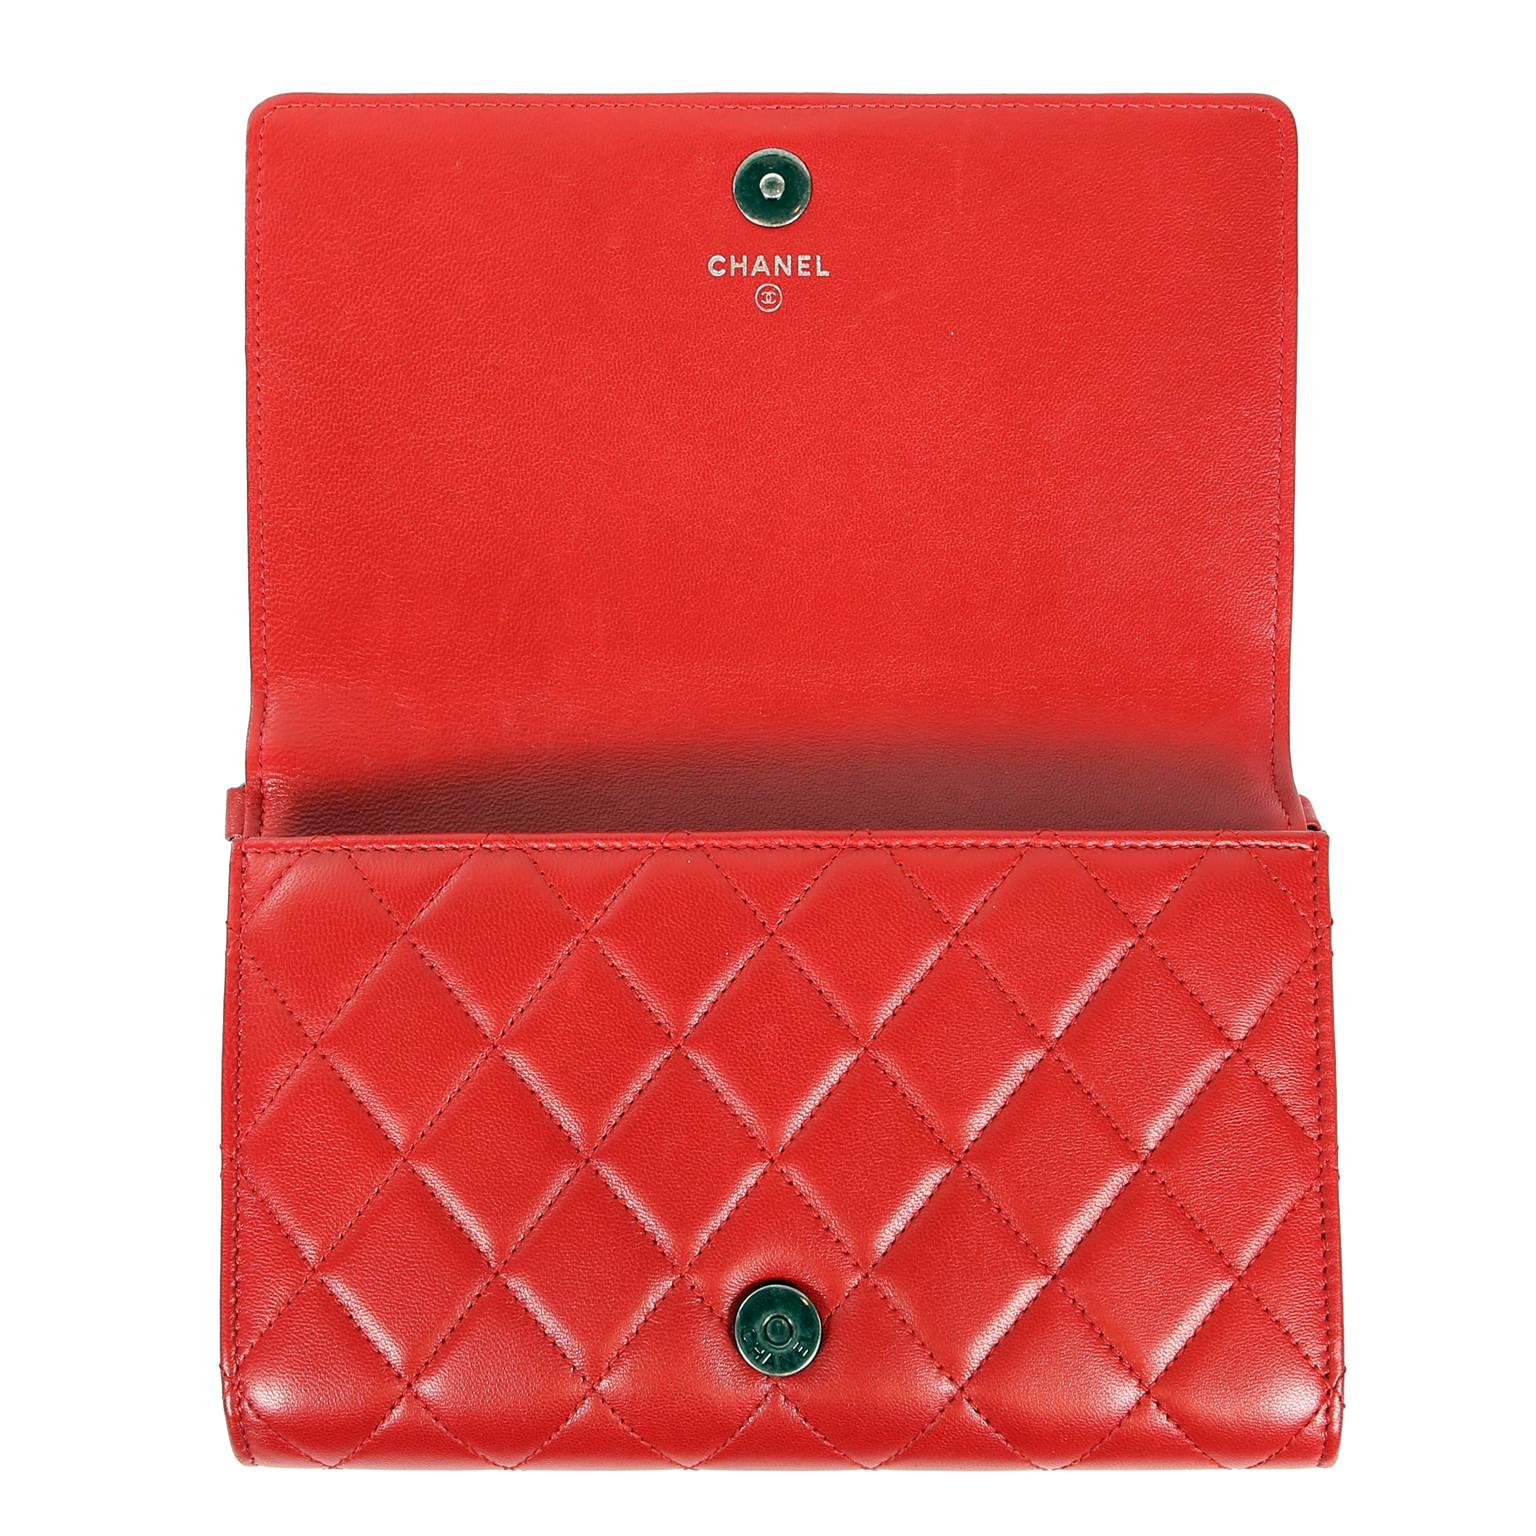 Chanel Red Leather Boy Bag Clutch with Chain 3